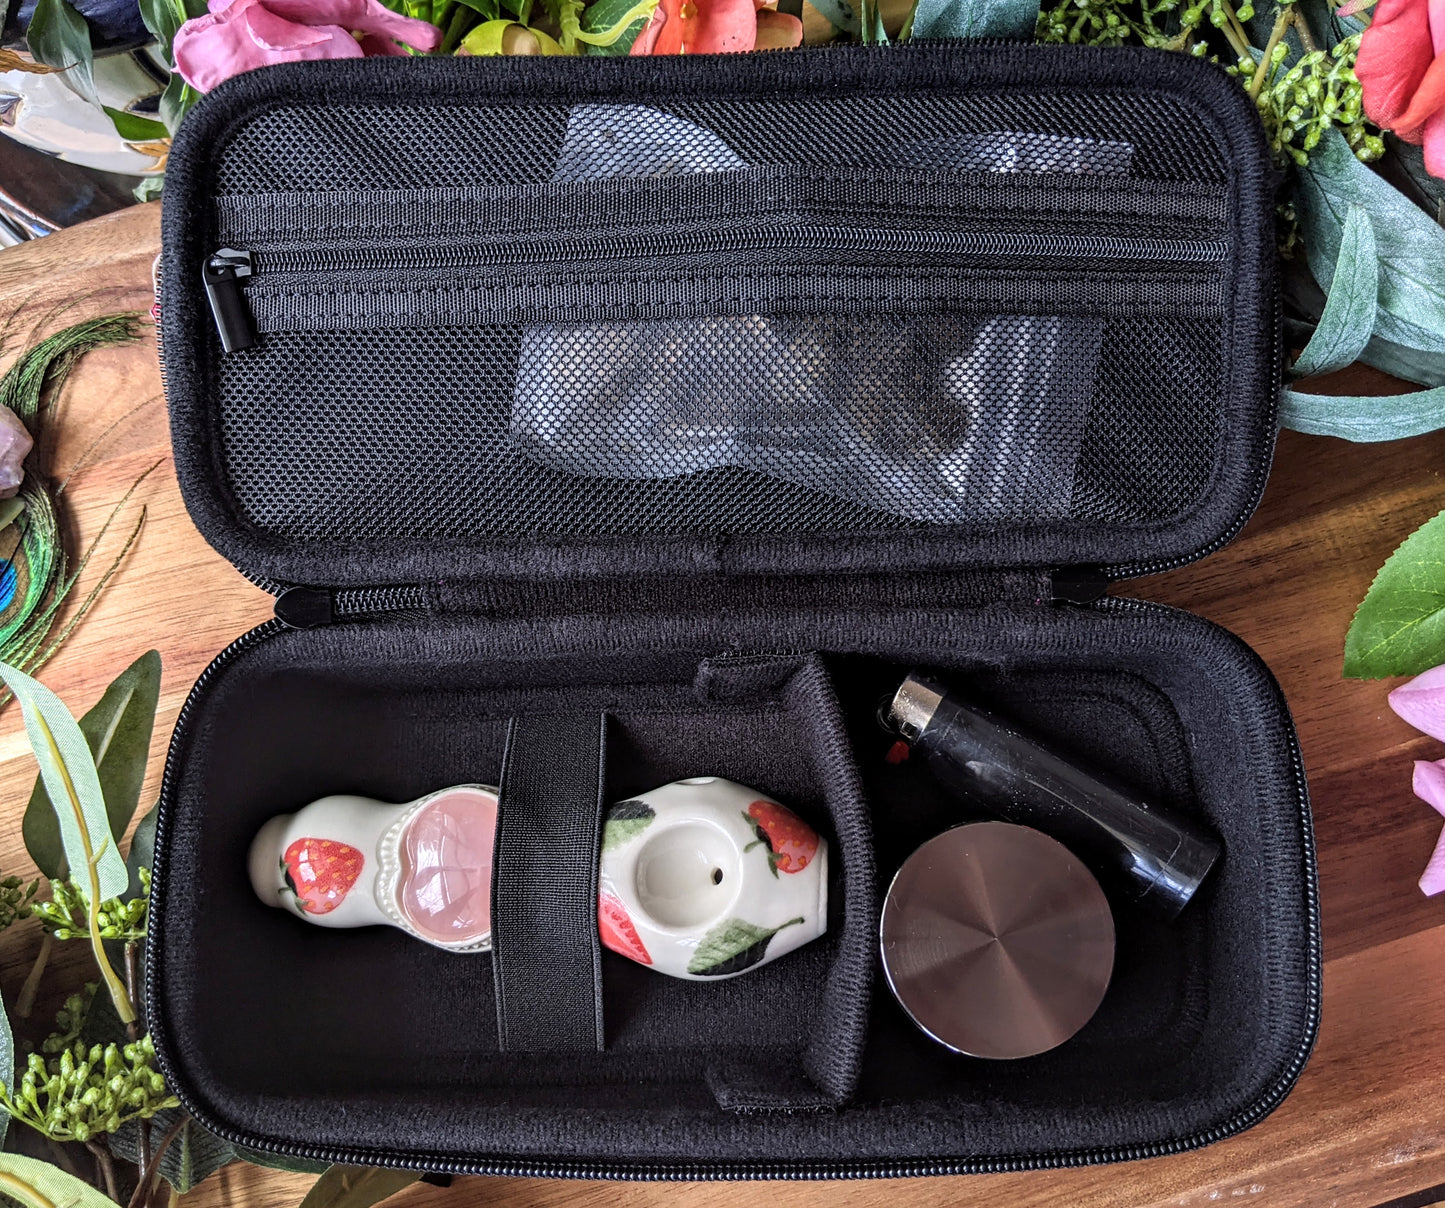 Hard Carrying Case for Pipe and Smoking Accessories